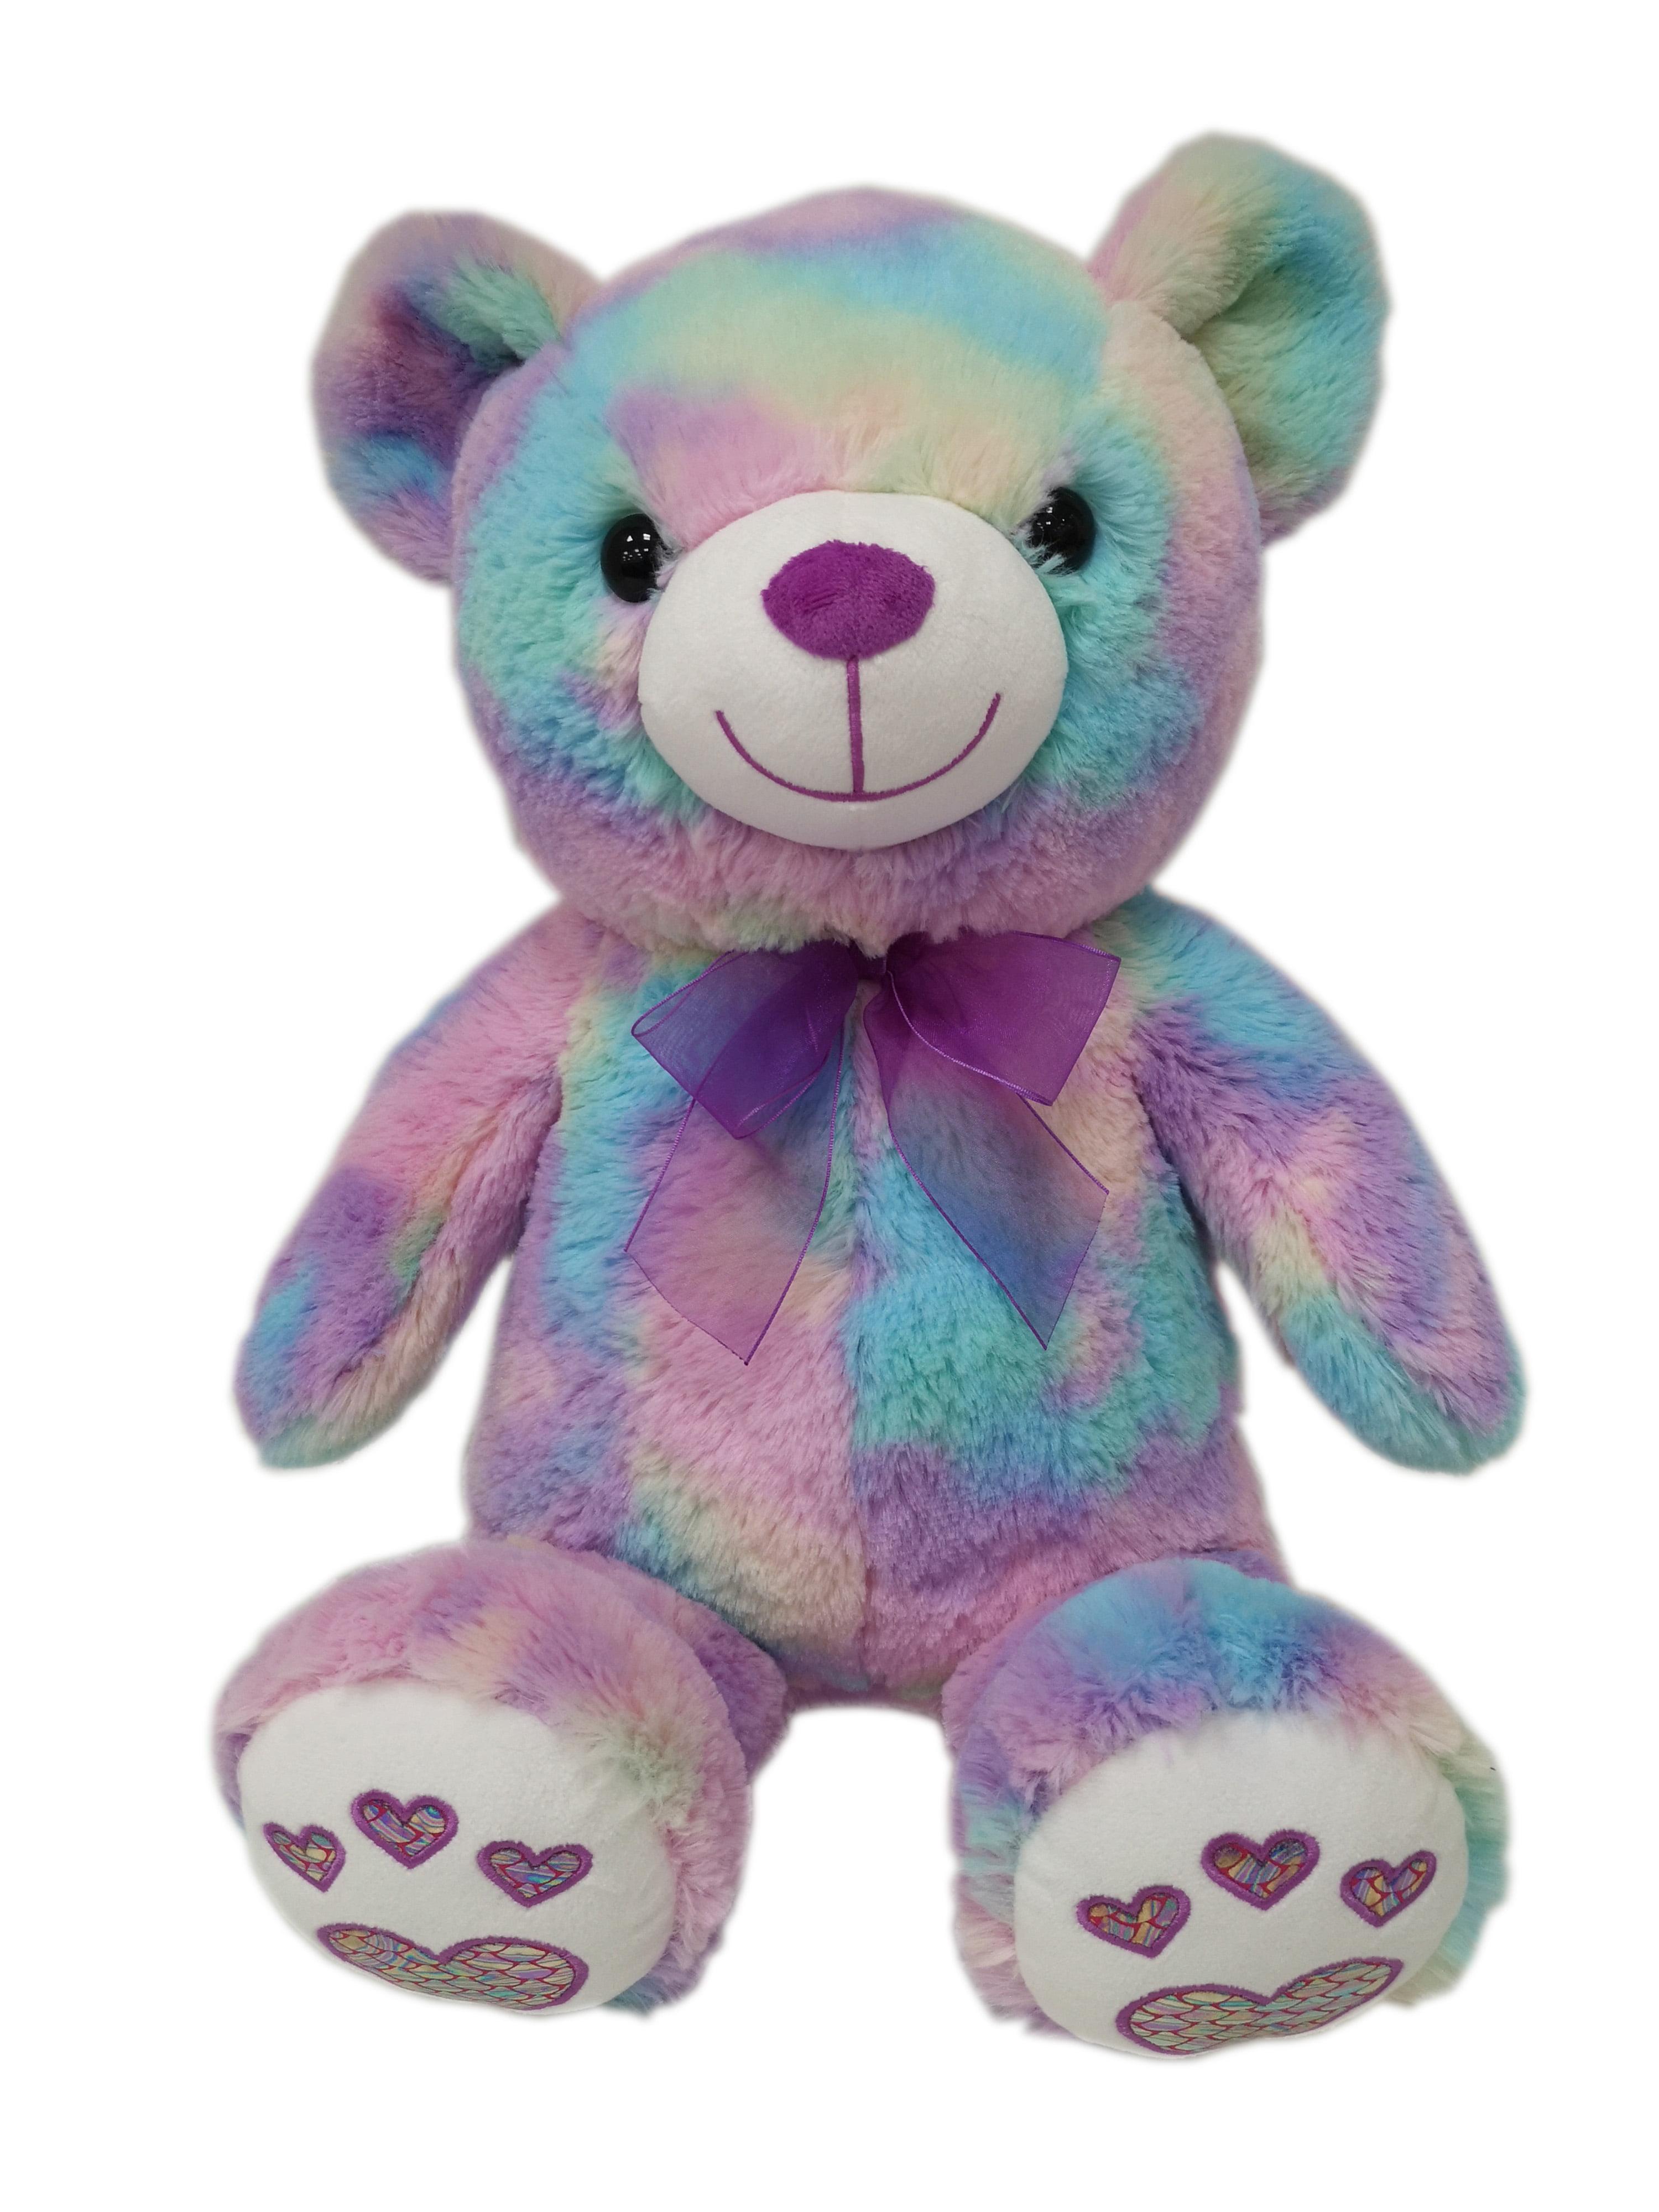 Blue The Petting Zoo 12 Tie-Dyed Soft Plush Teddy Bears 